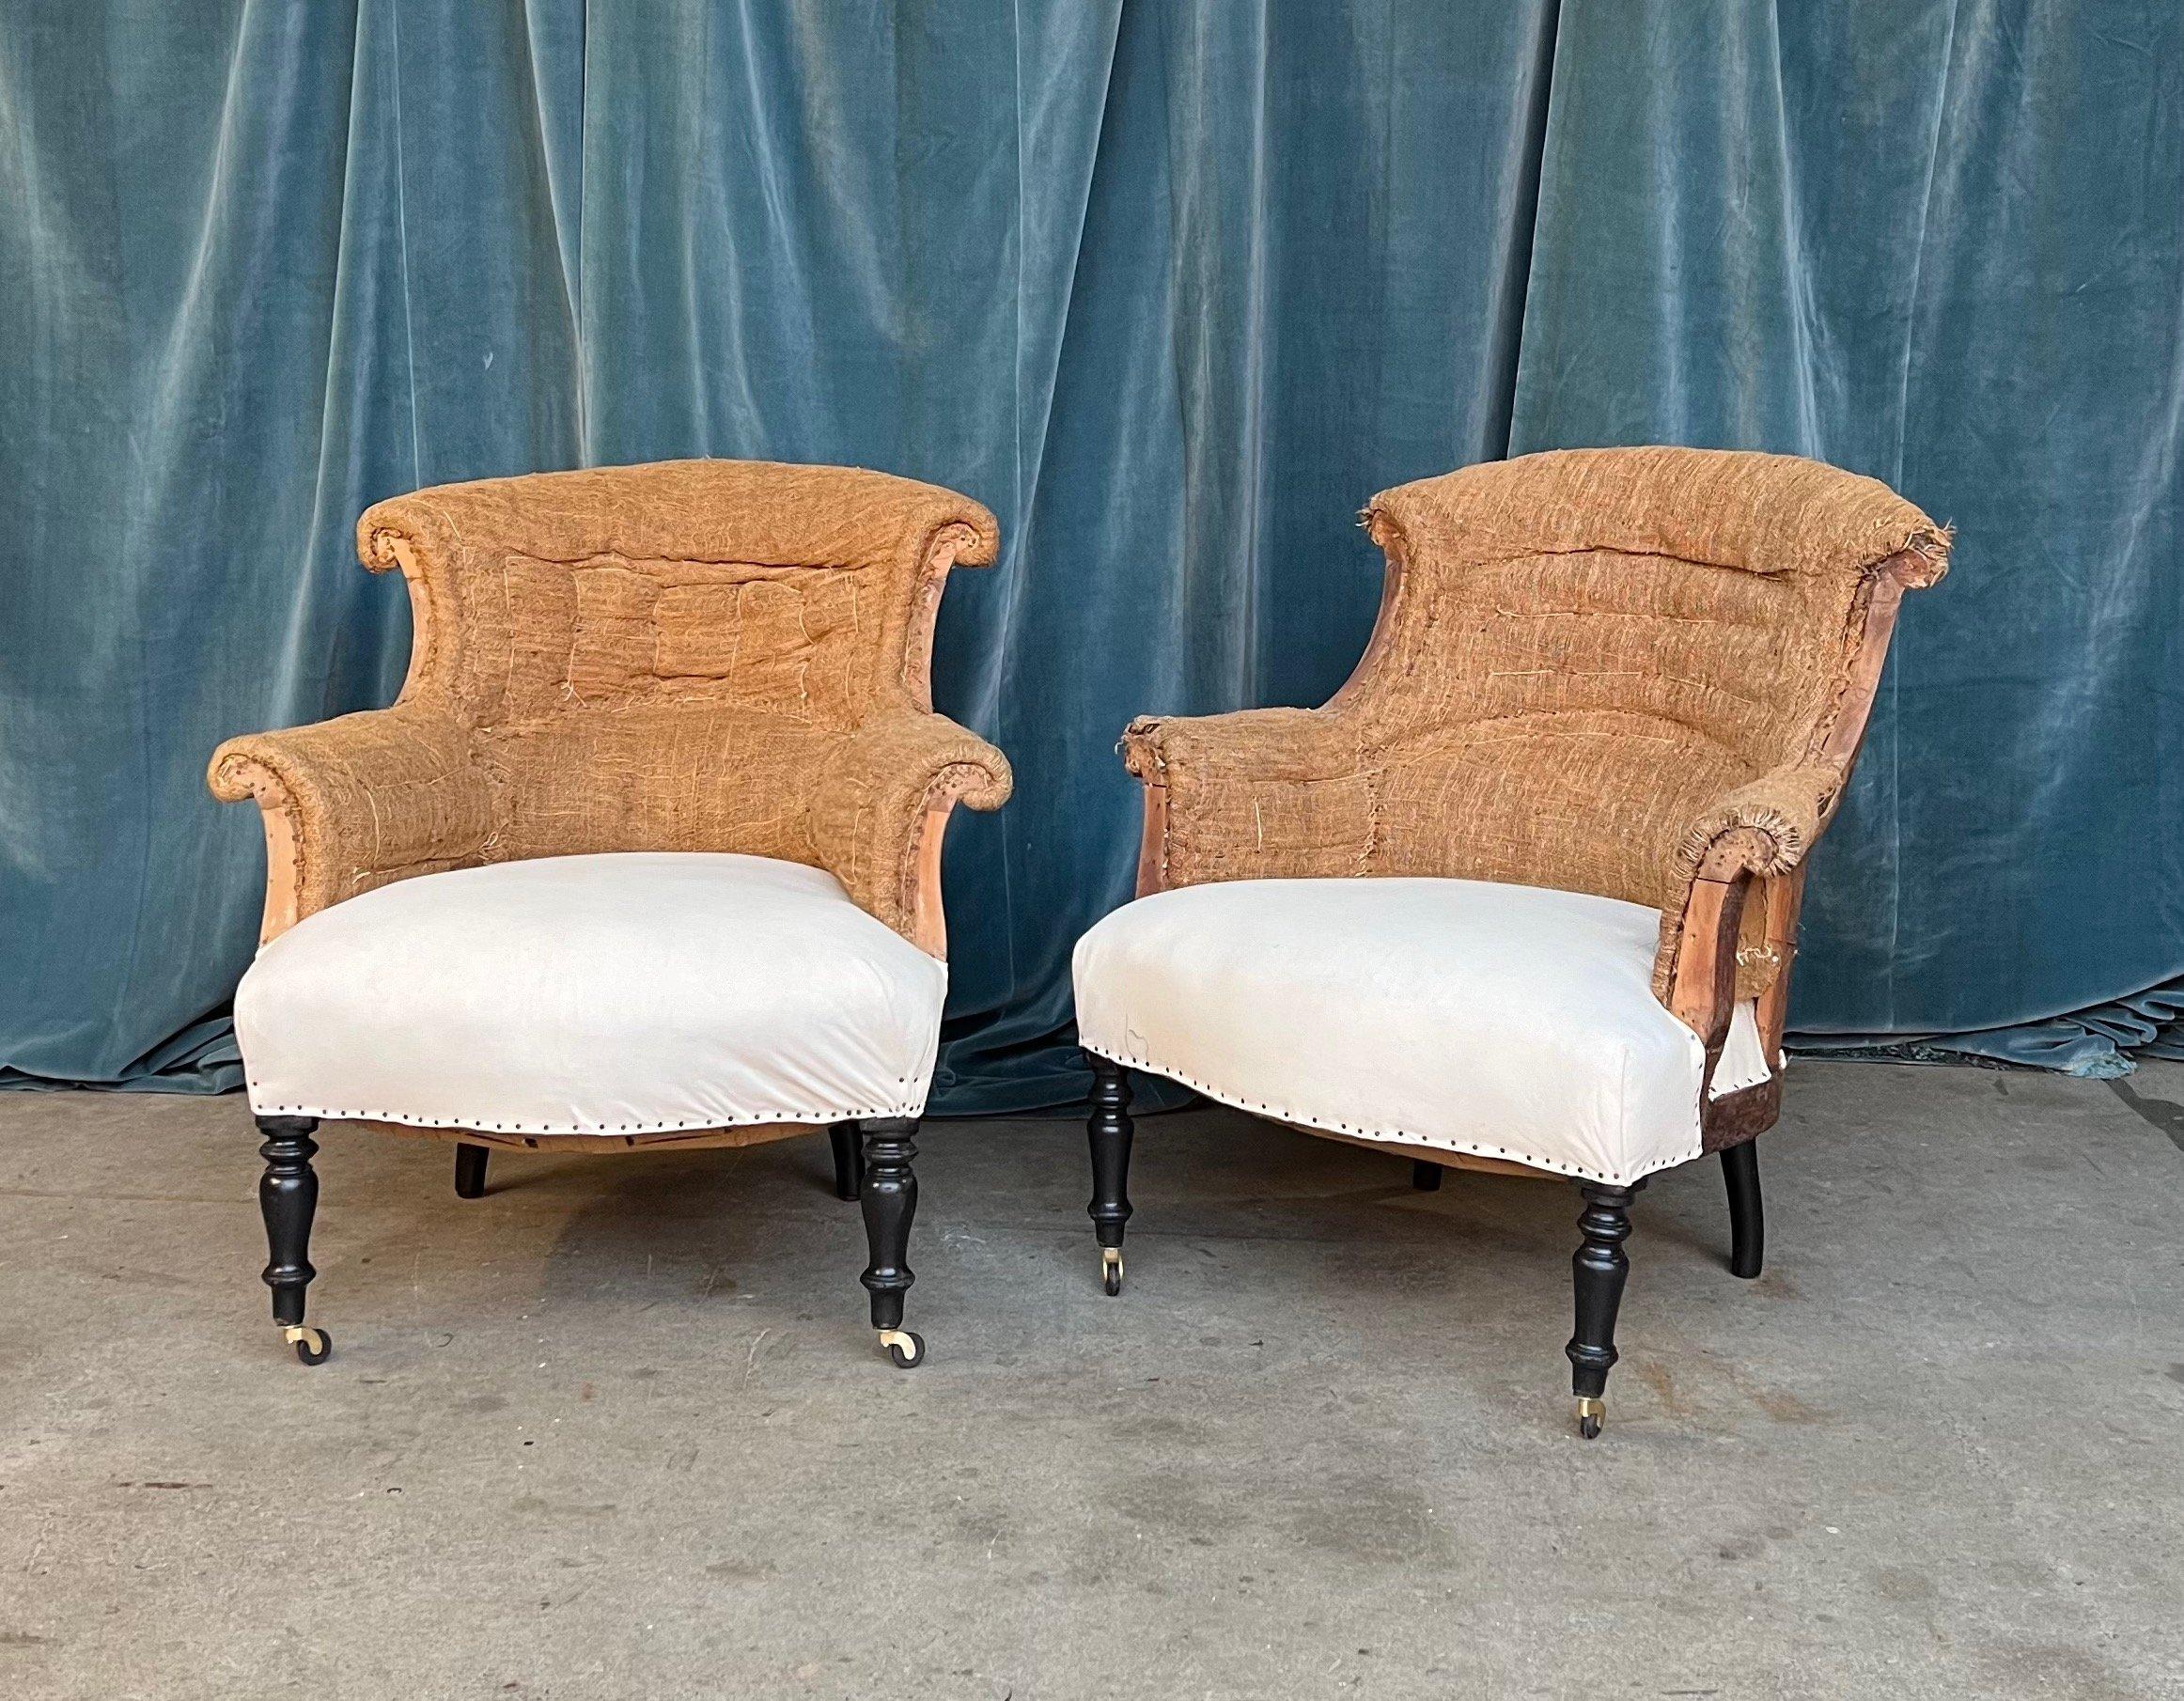 A classic pair of French Napoleon III armchairs with scrolled arms and back. The chairs have been stripped down to the burlap and muslin and are ready to be upholstered. We have added casters to the the front legs to make the chairs more comfortable